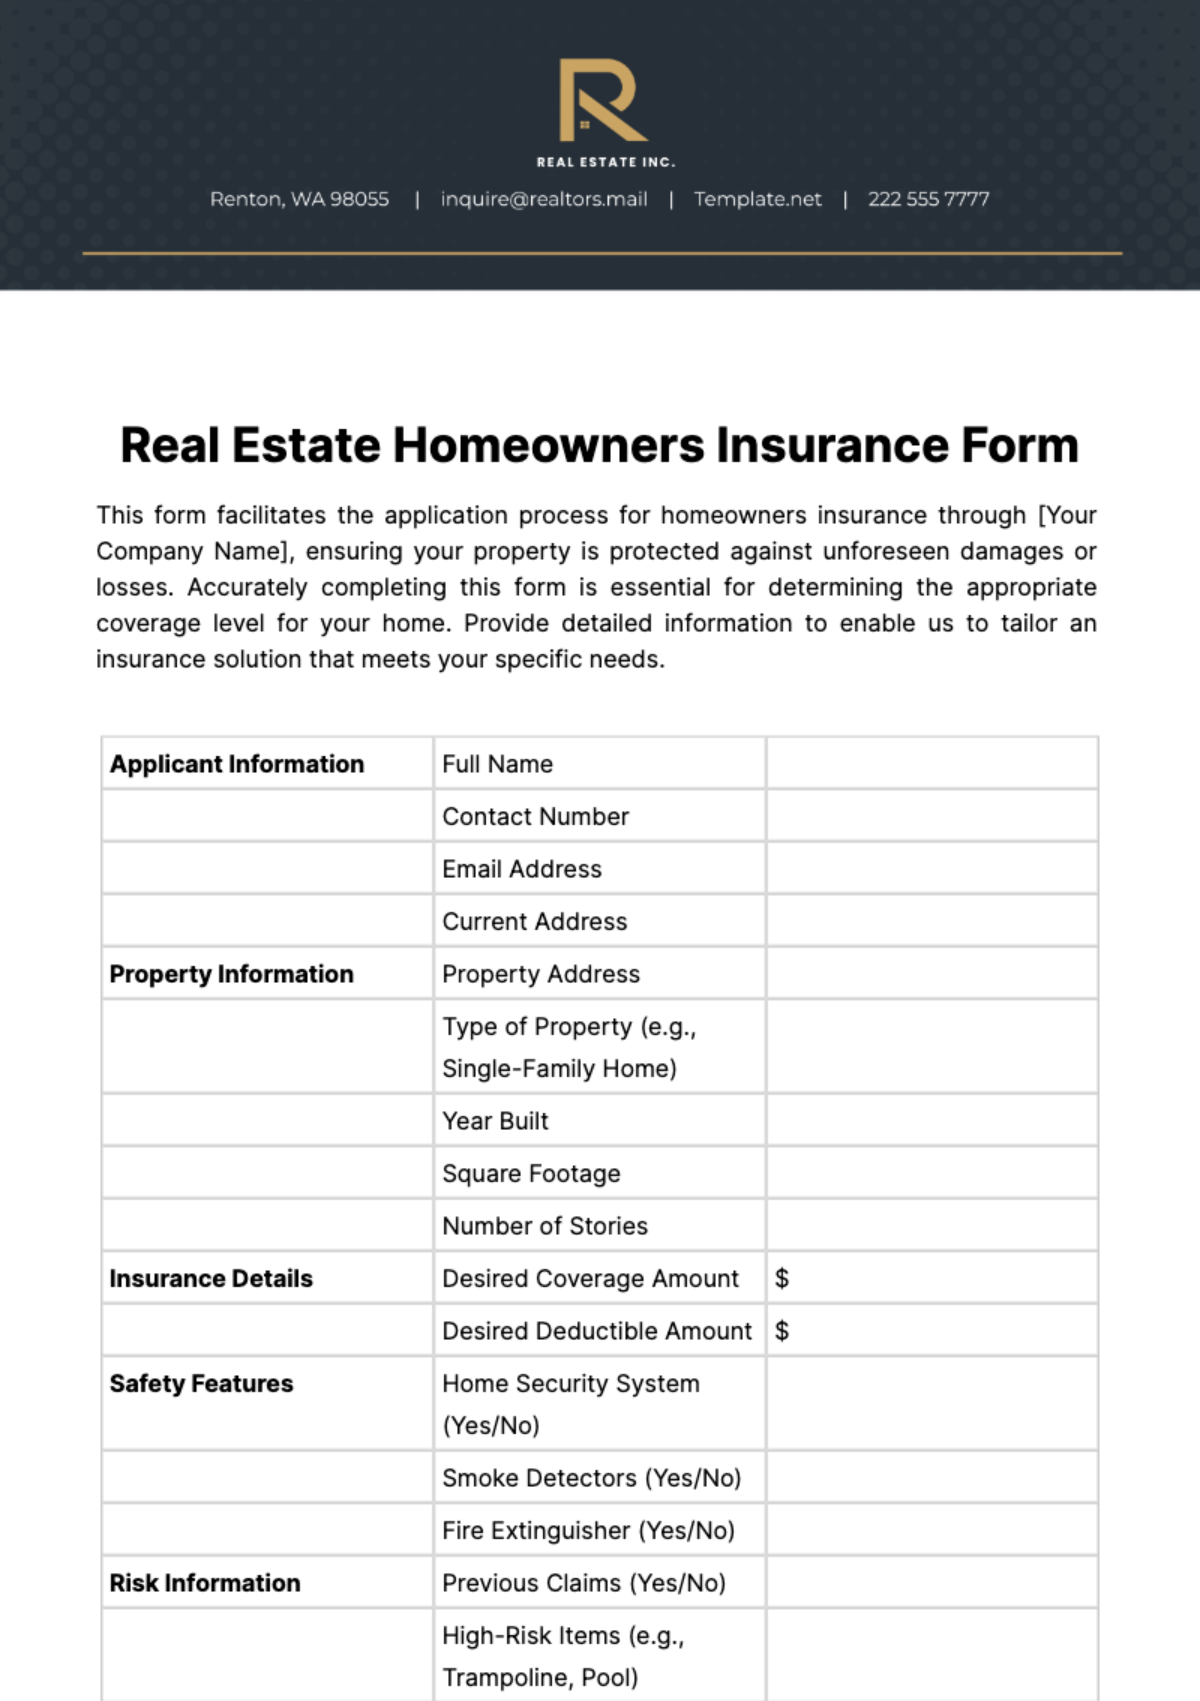 Real Estate Homeowners Insurance Form Template